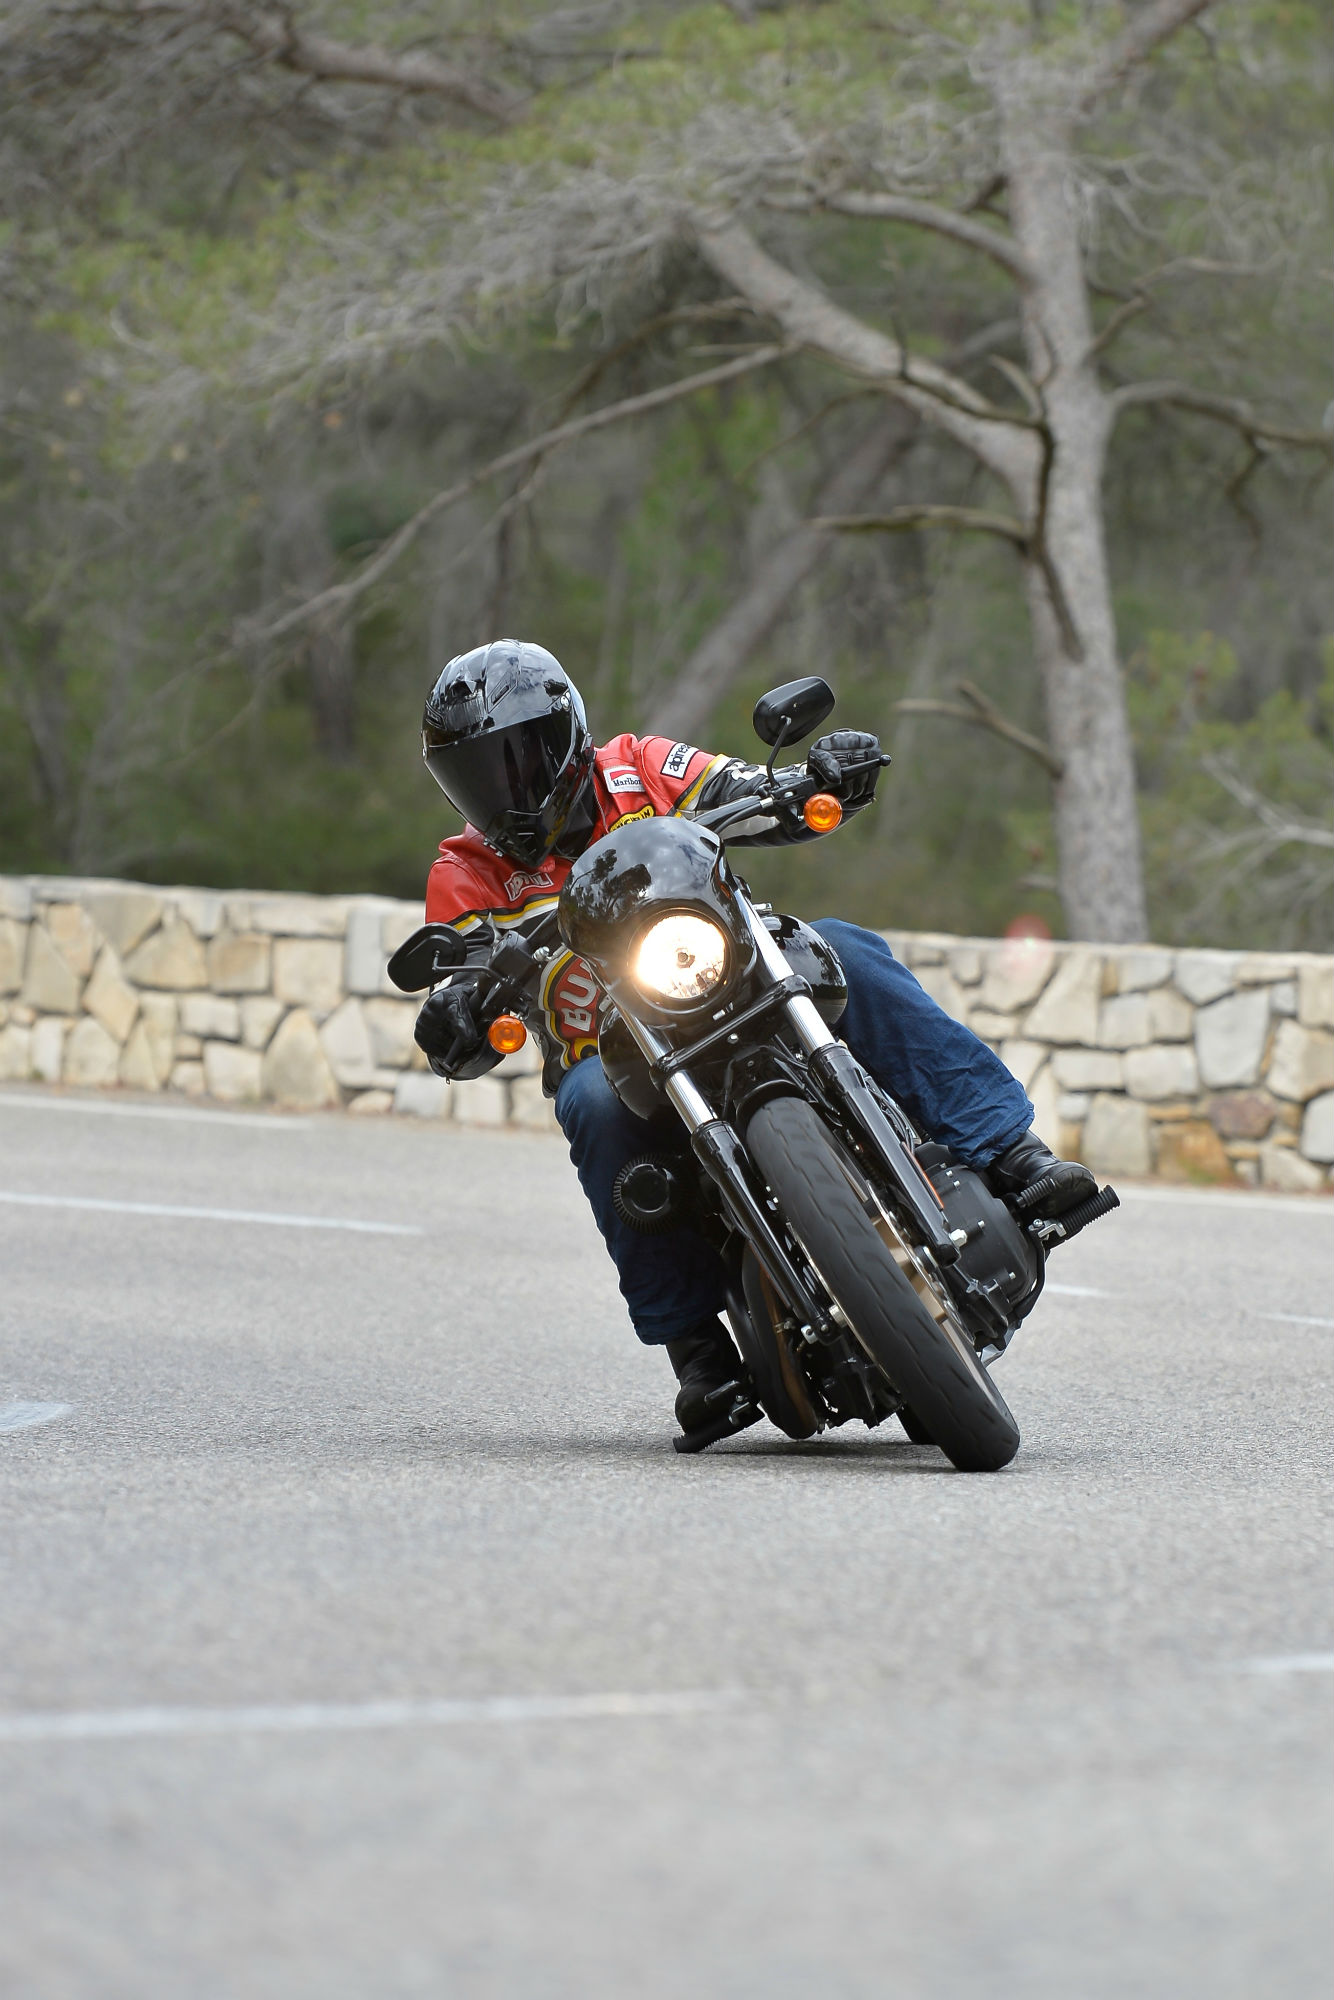 First ride: Harley-Davidson Roadster and Low Rider S review